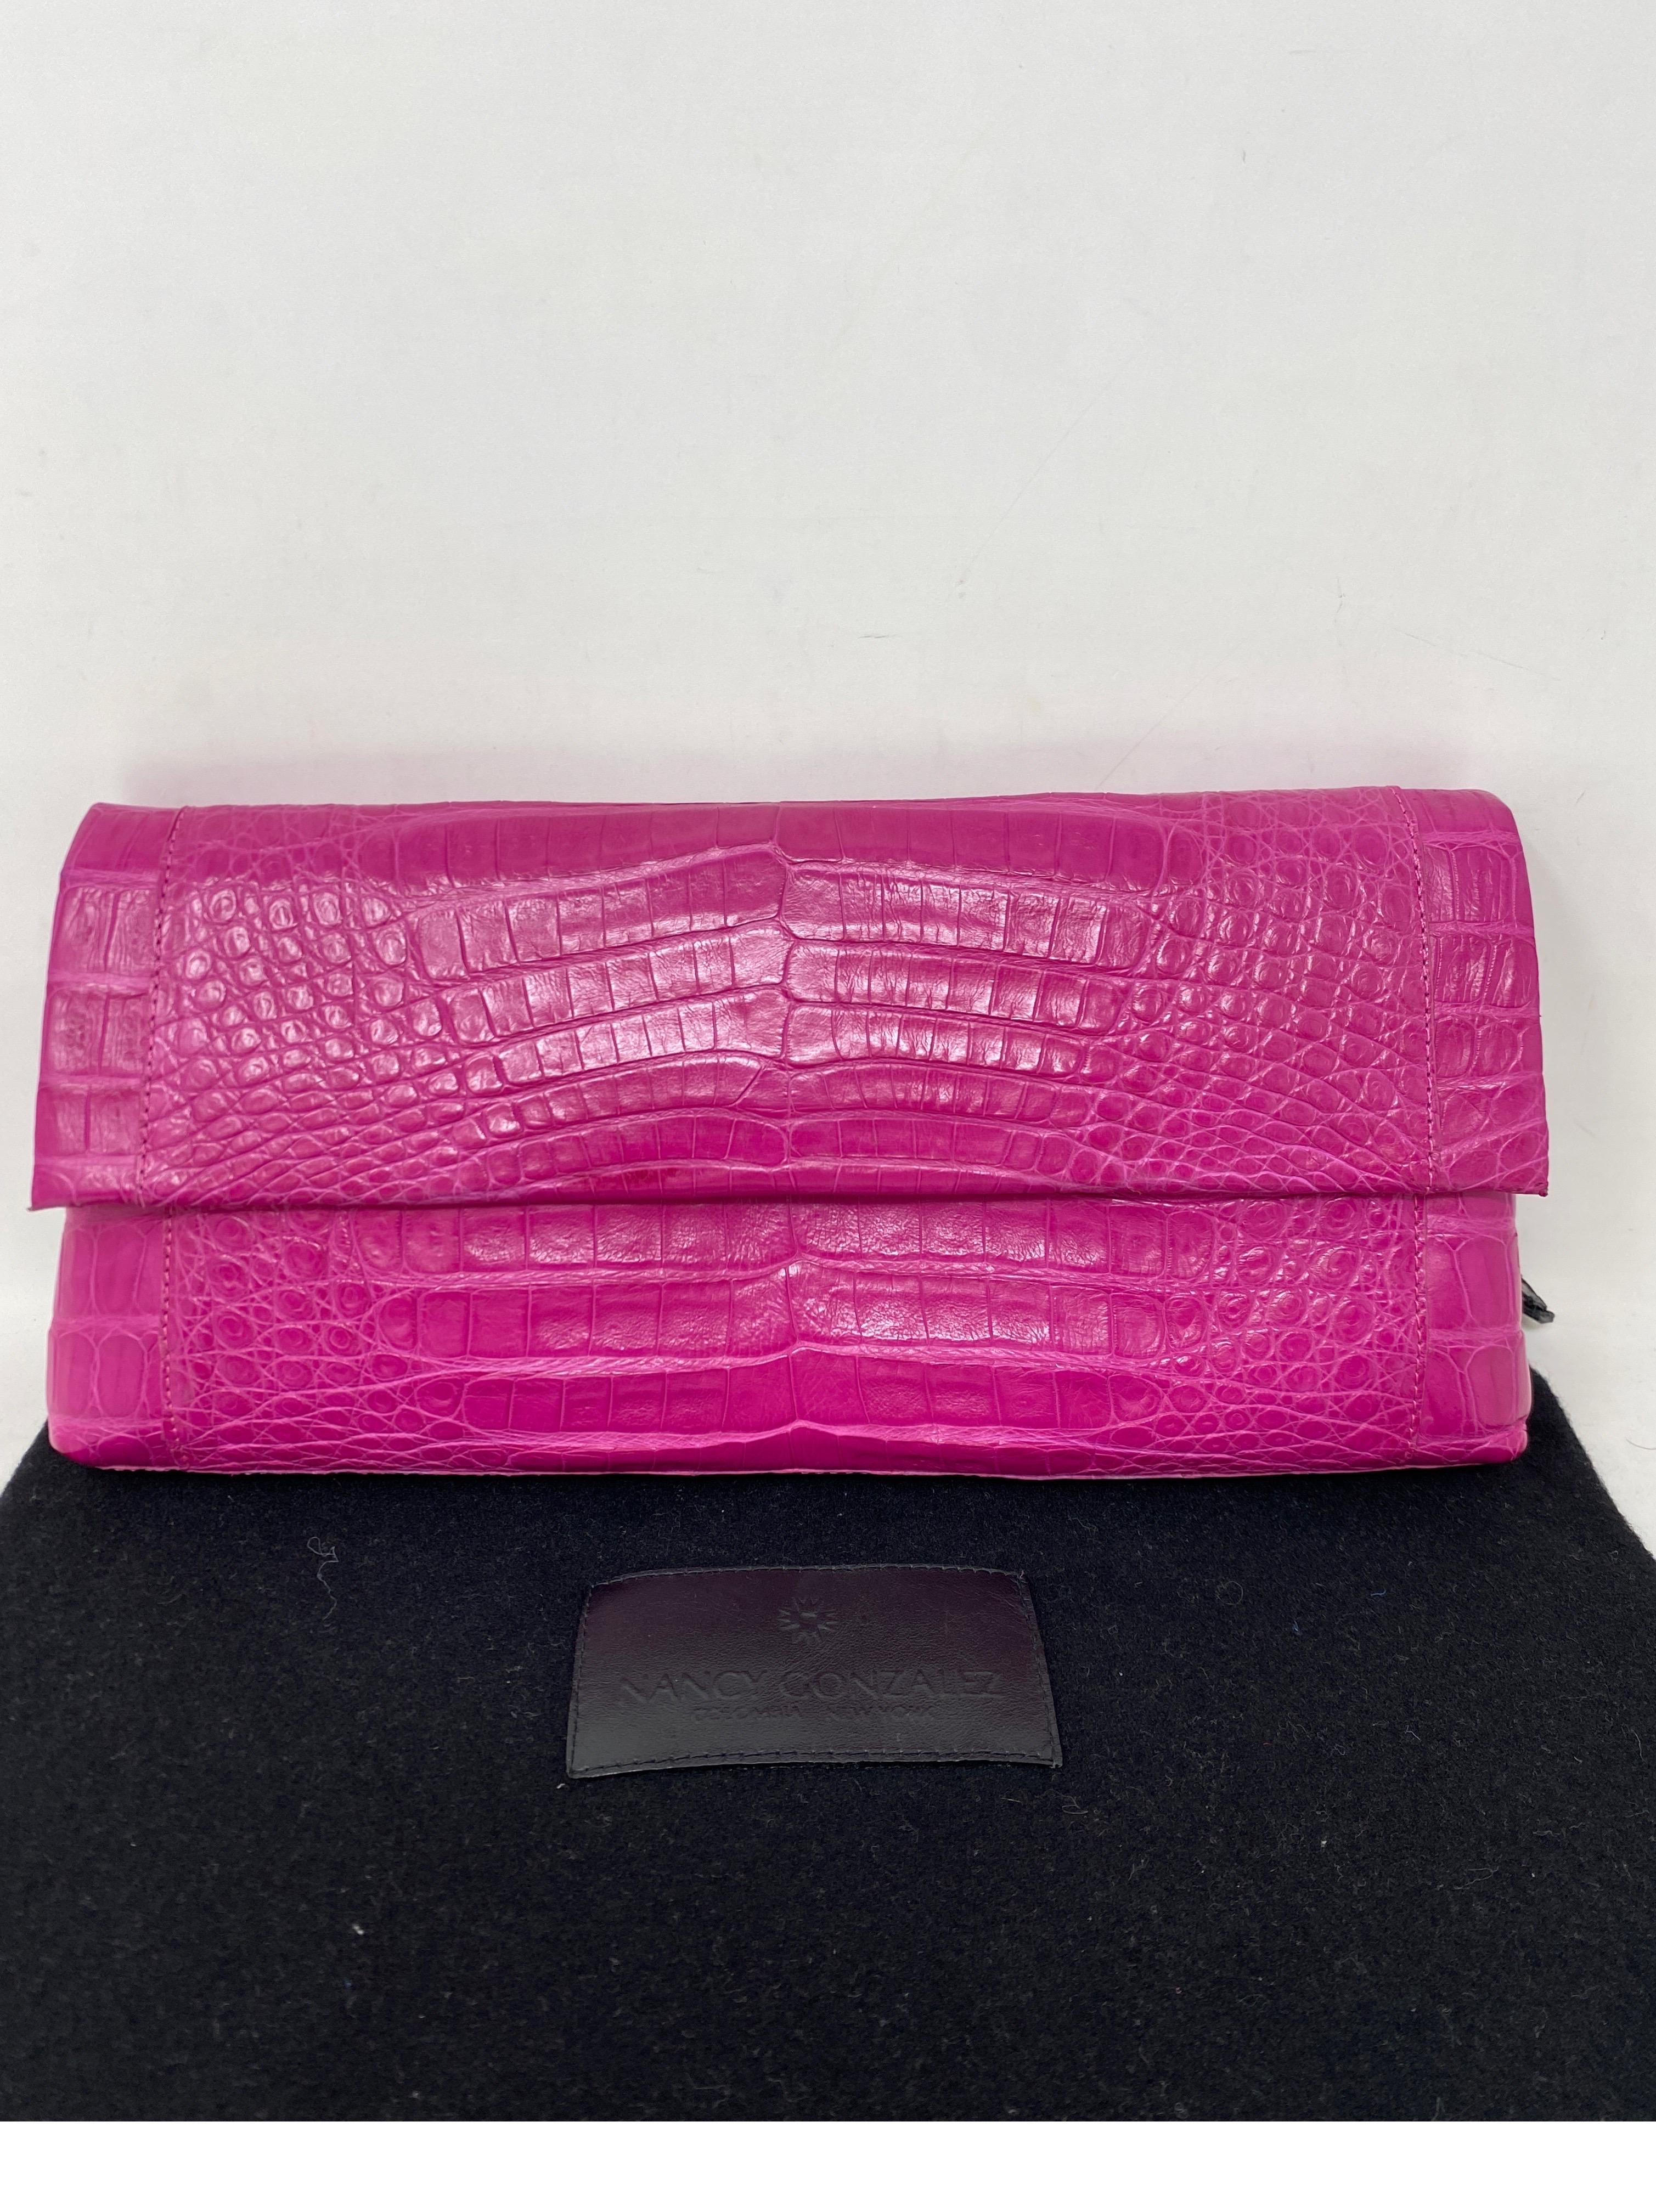 Nancy Gonzalez Hot Pink Crocodile Clutch. Mint condition. Beautiful color bag. Interior clean. Never worn. Comes with tags and dust bag. Guaranteed authentic. 